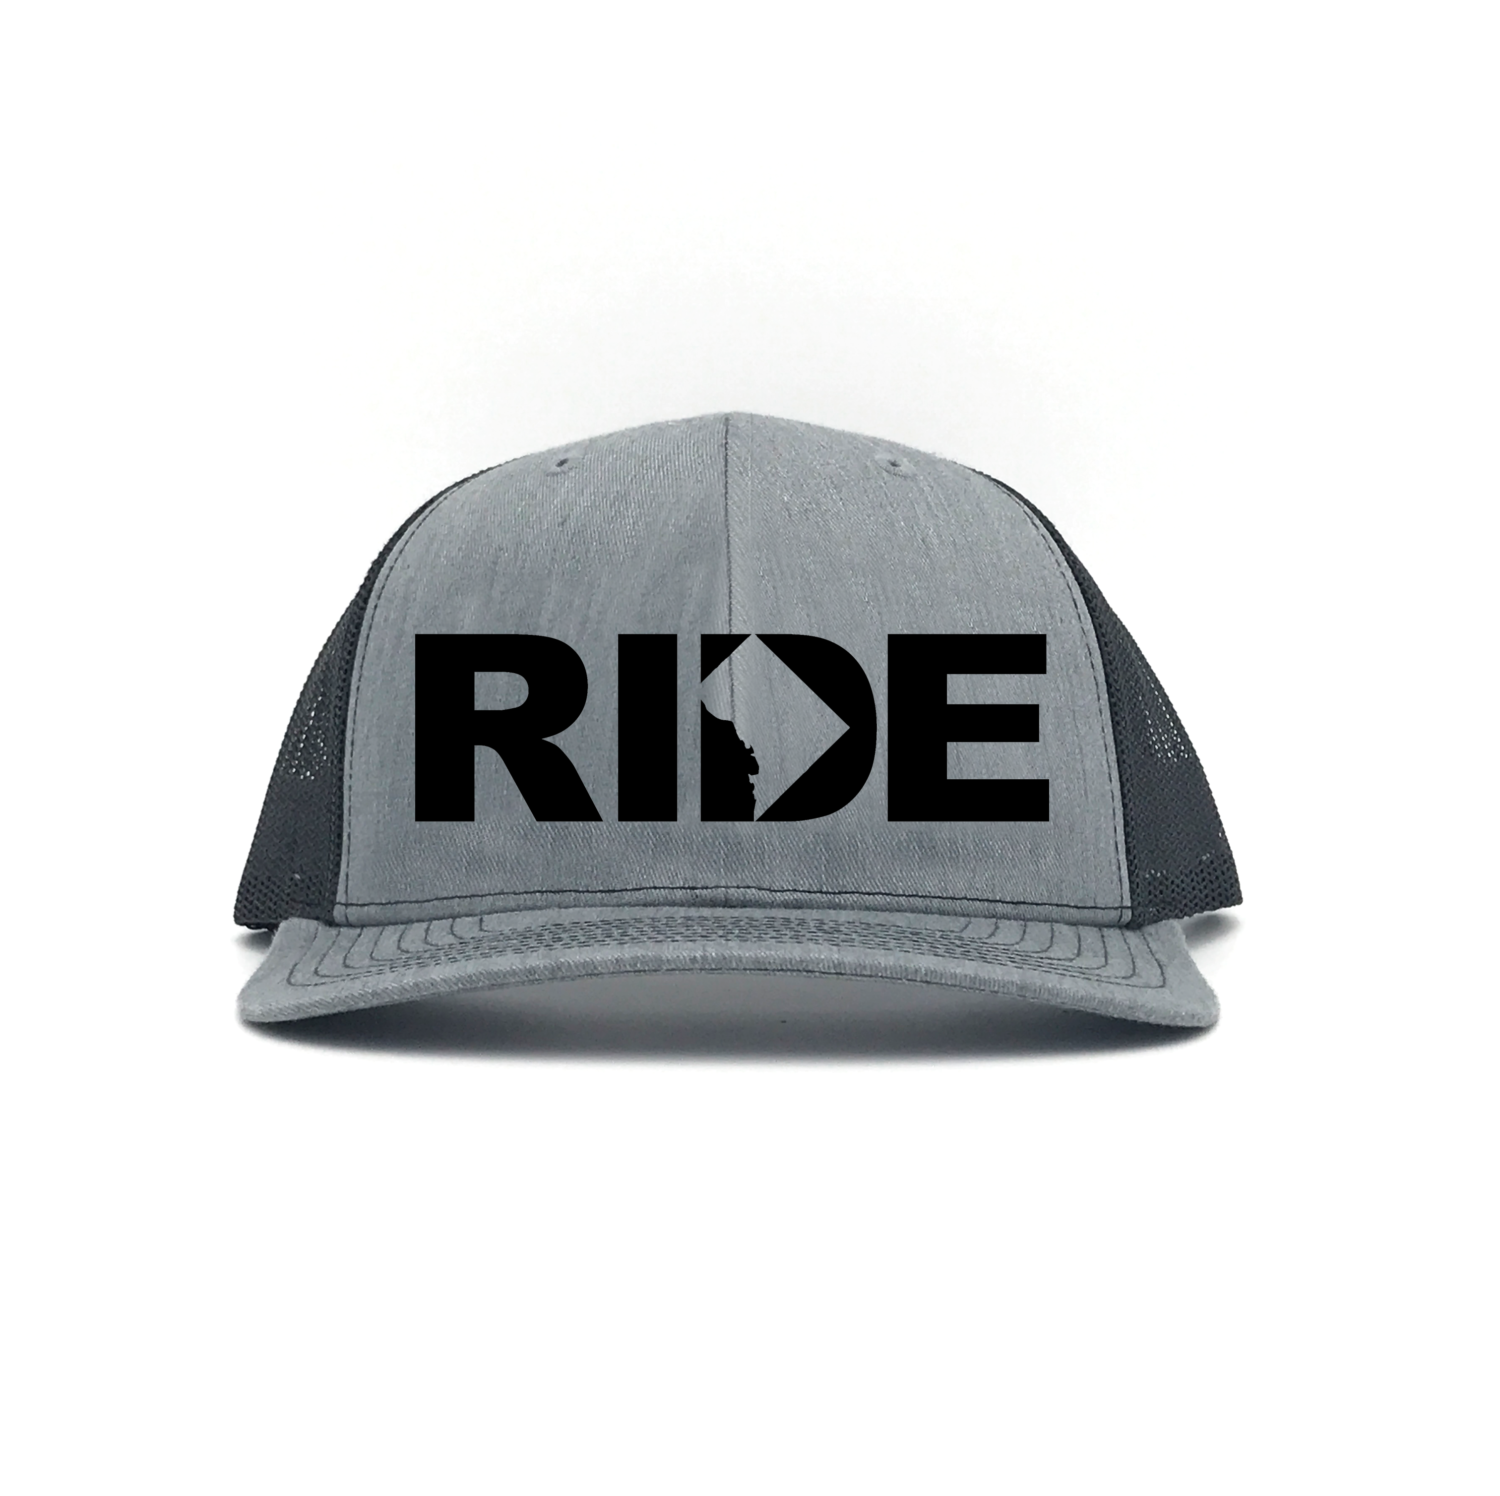 Ride District of Columbia Classic Embroidered Snapback Trucker Hat Heather Gray/Black